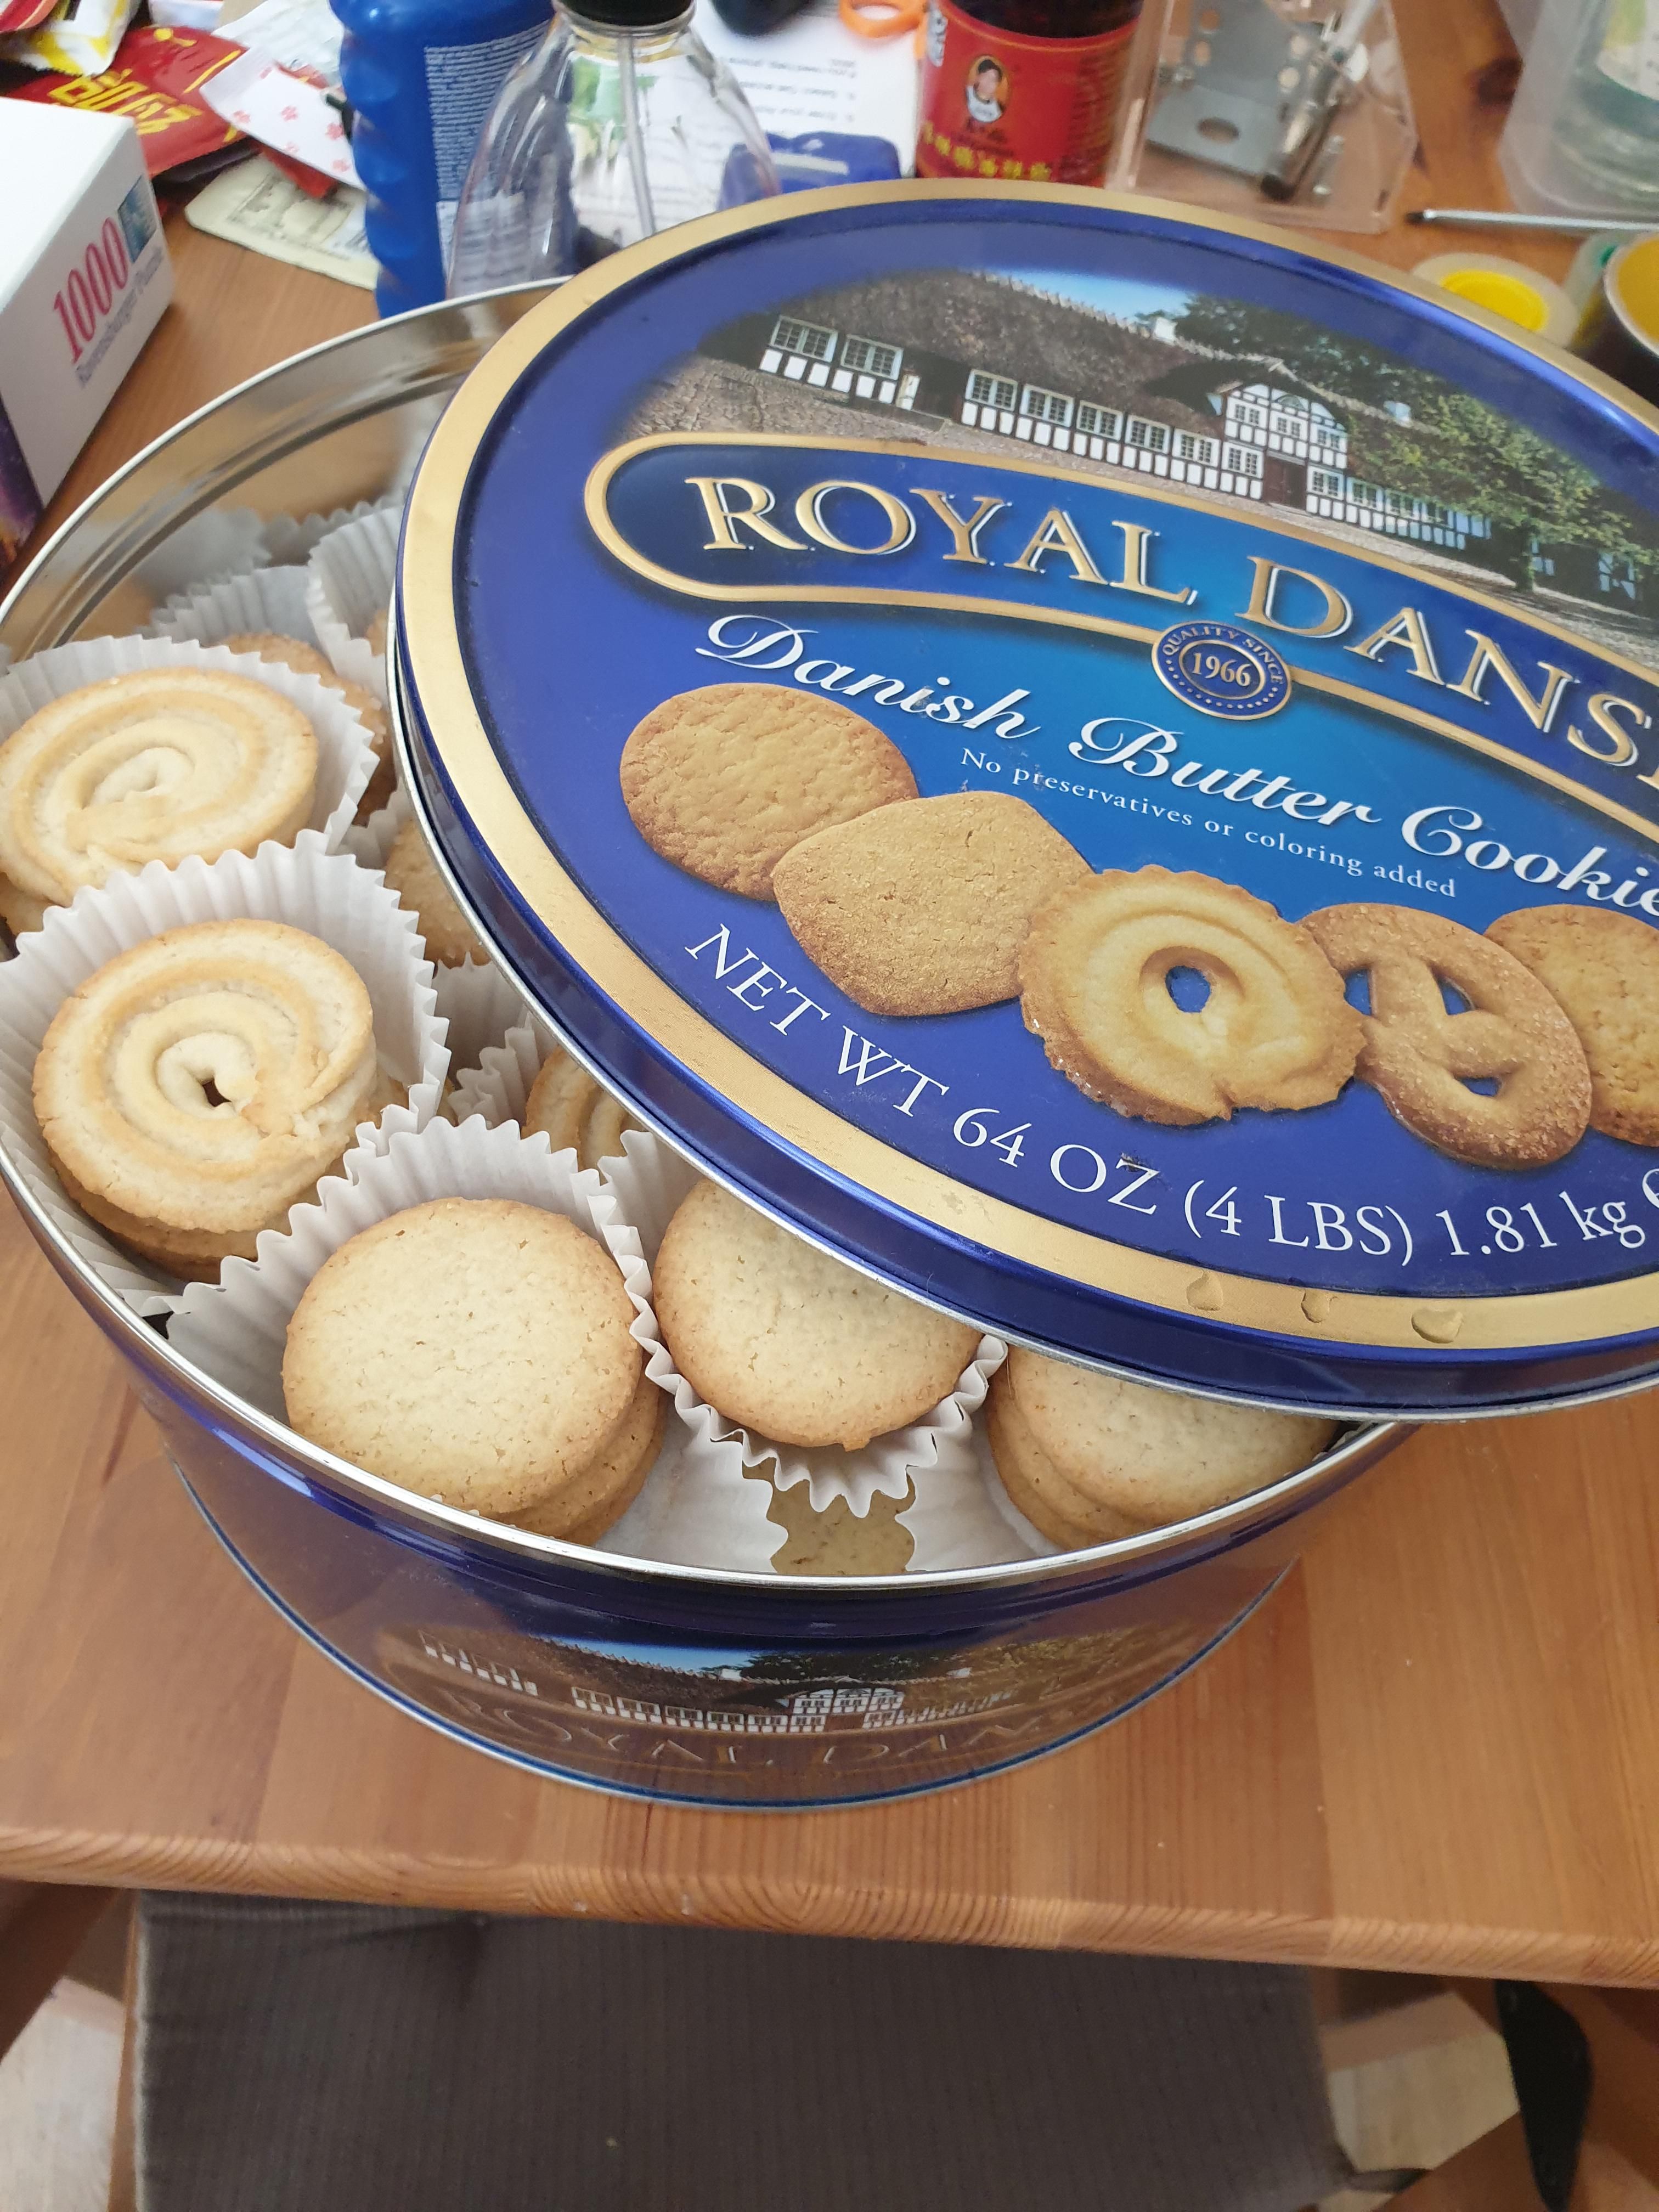 This box of cookies doesn't have sewing equipment or tools in it